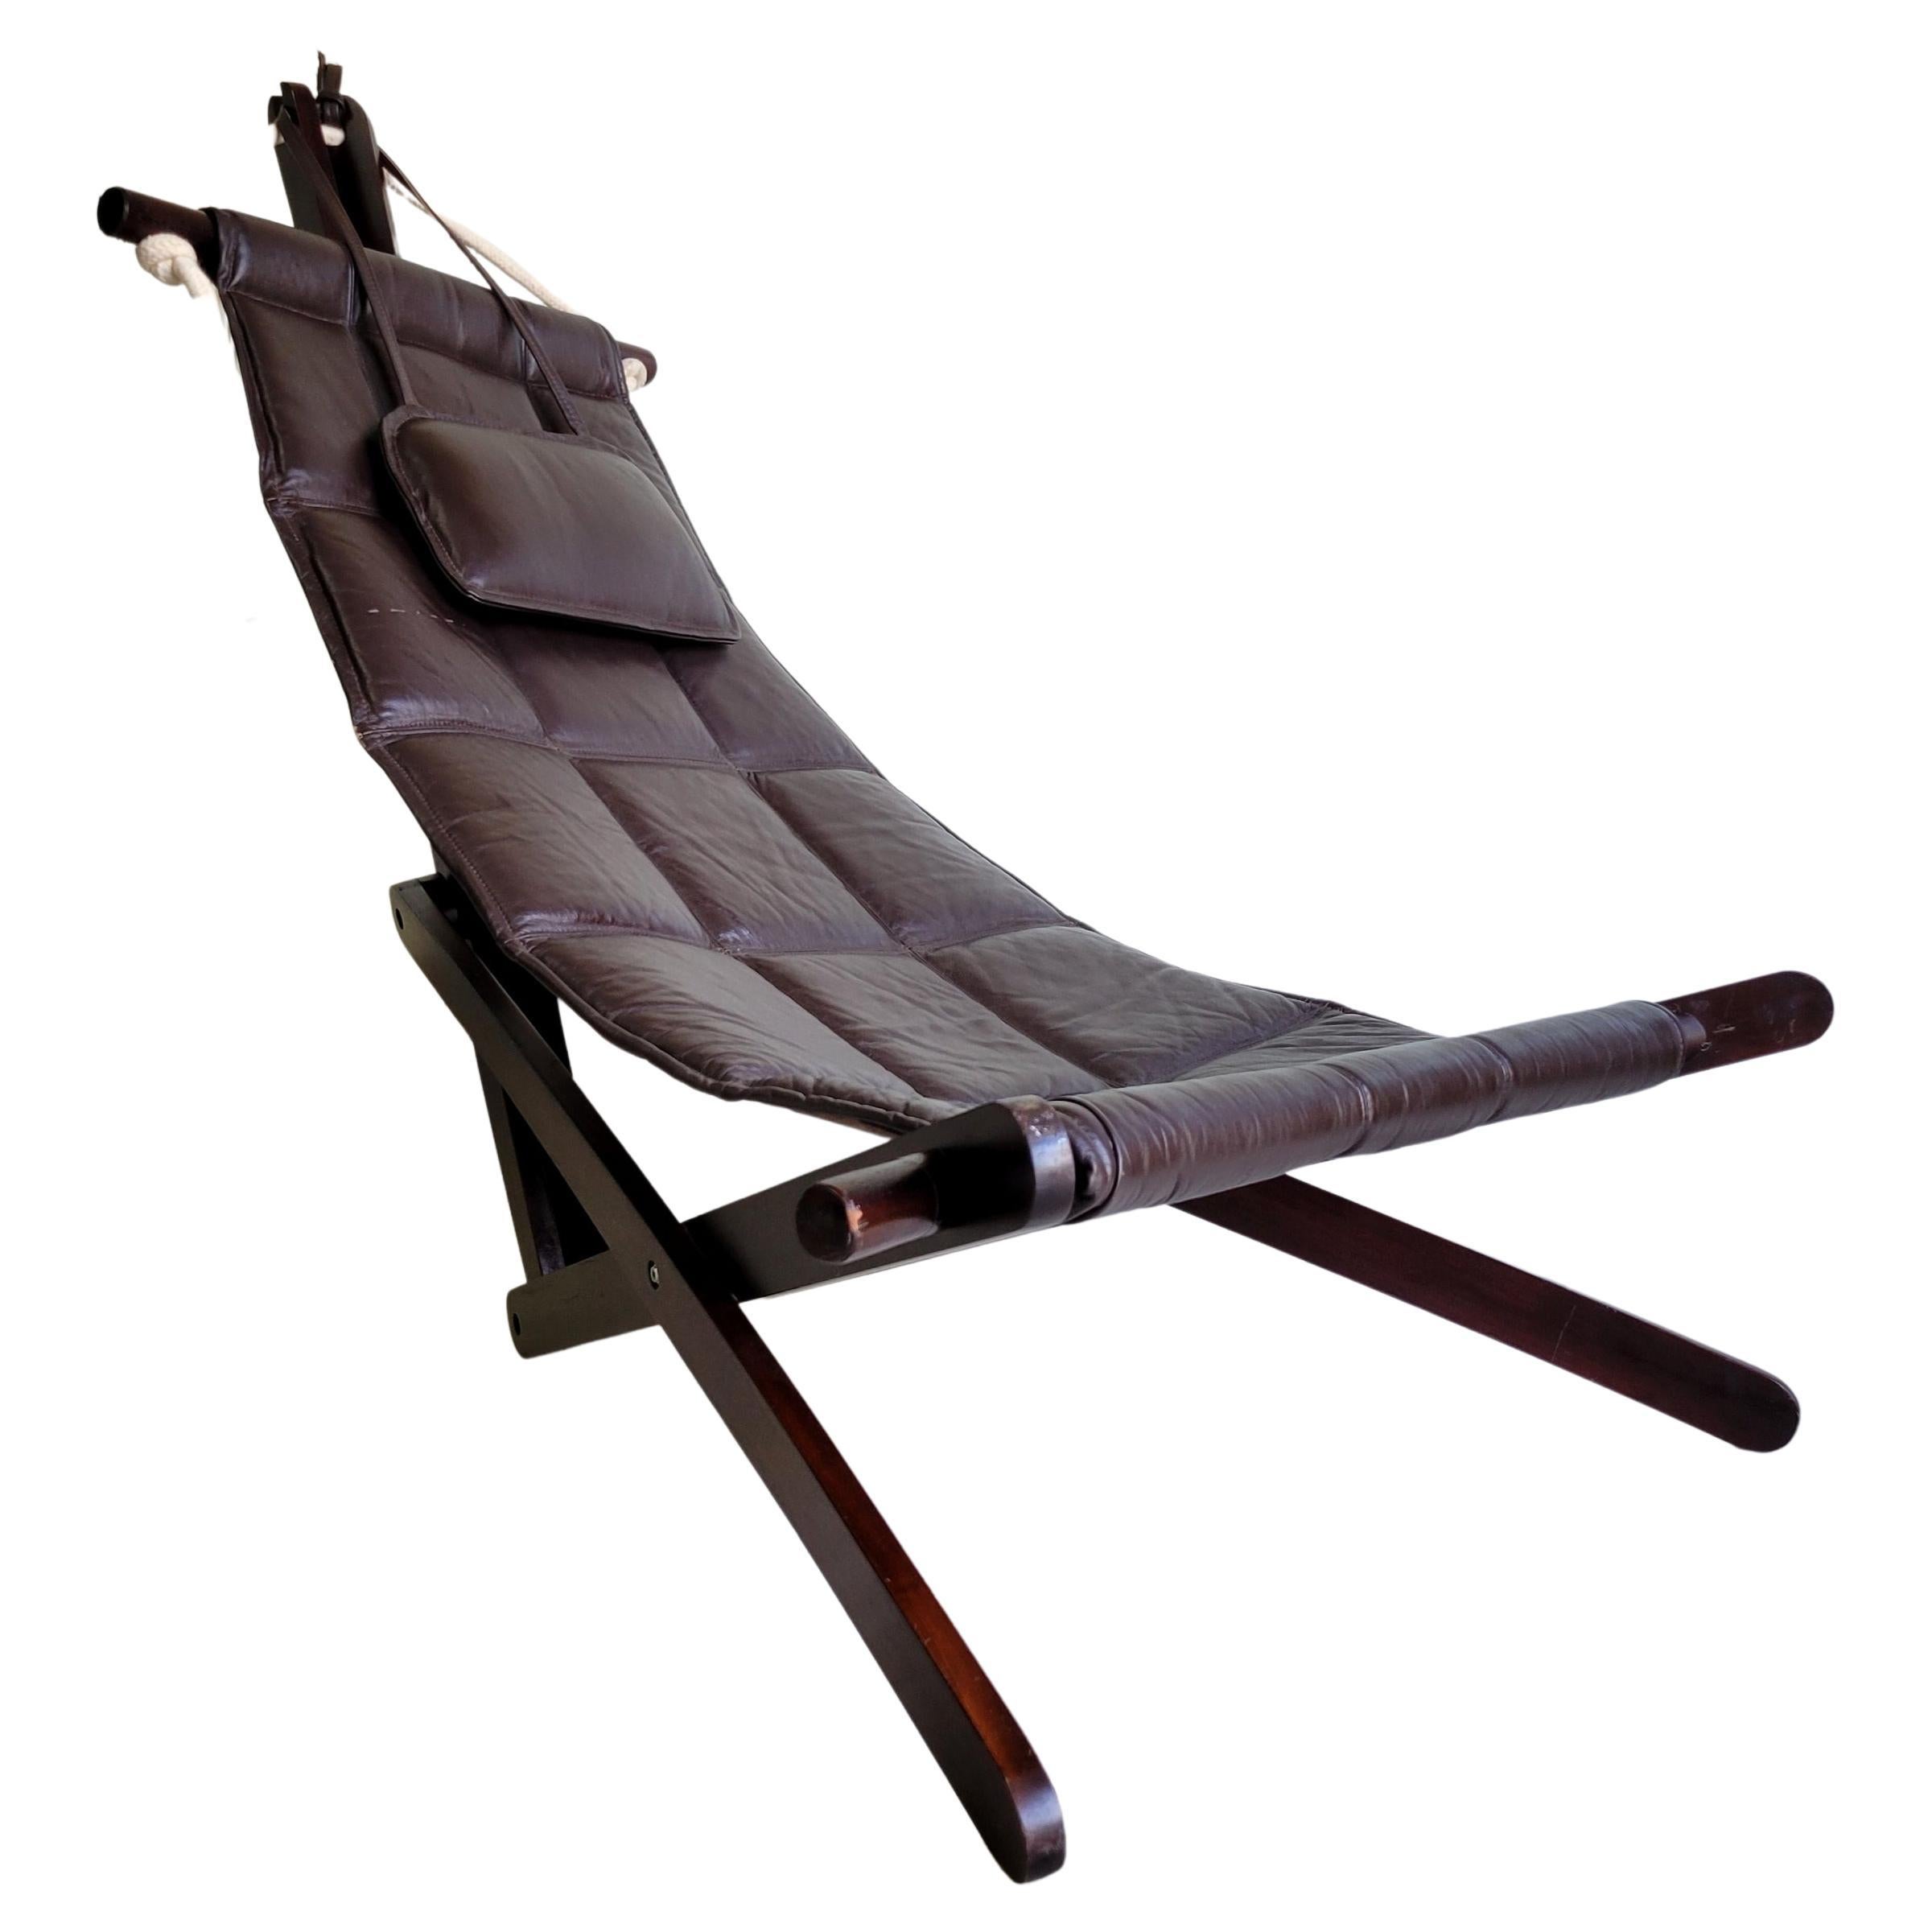 Dominic Michaelis 'Sail Chair' for Moveis Corazza Brazilian Lounge Chair For Sale